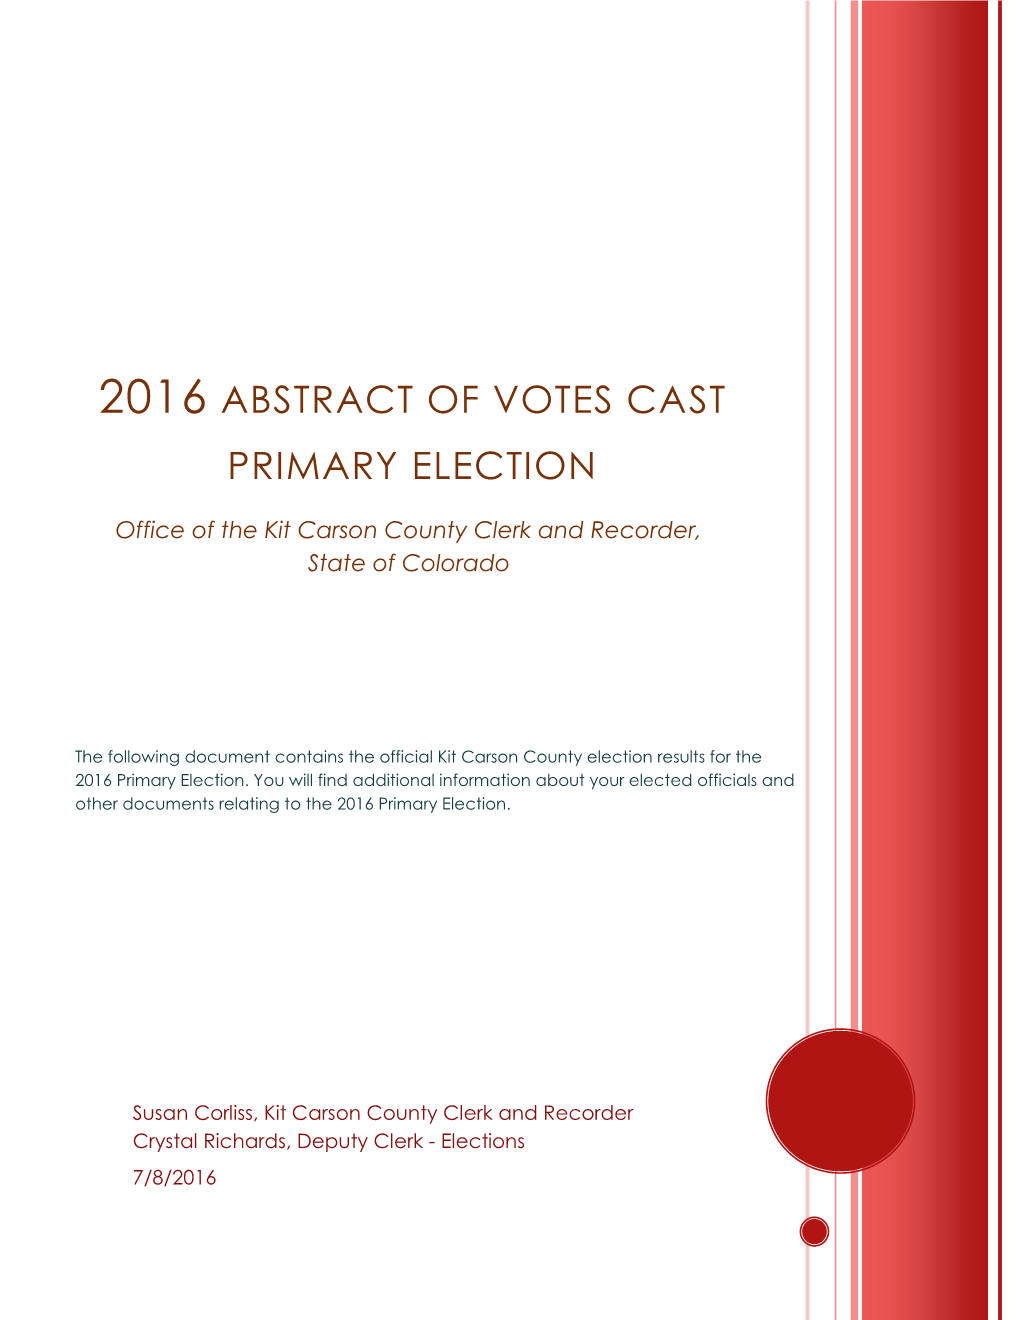 2016 Abstract of Votes Cast Primary Election